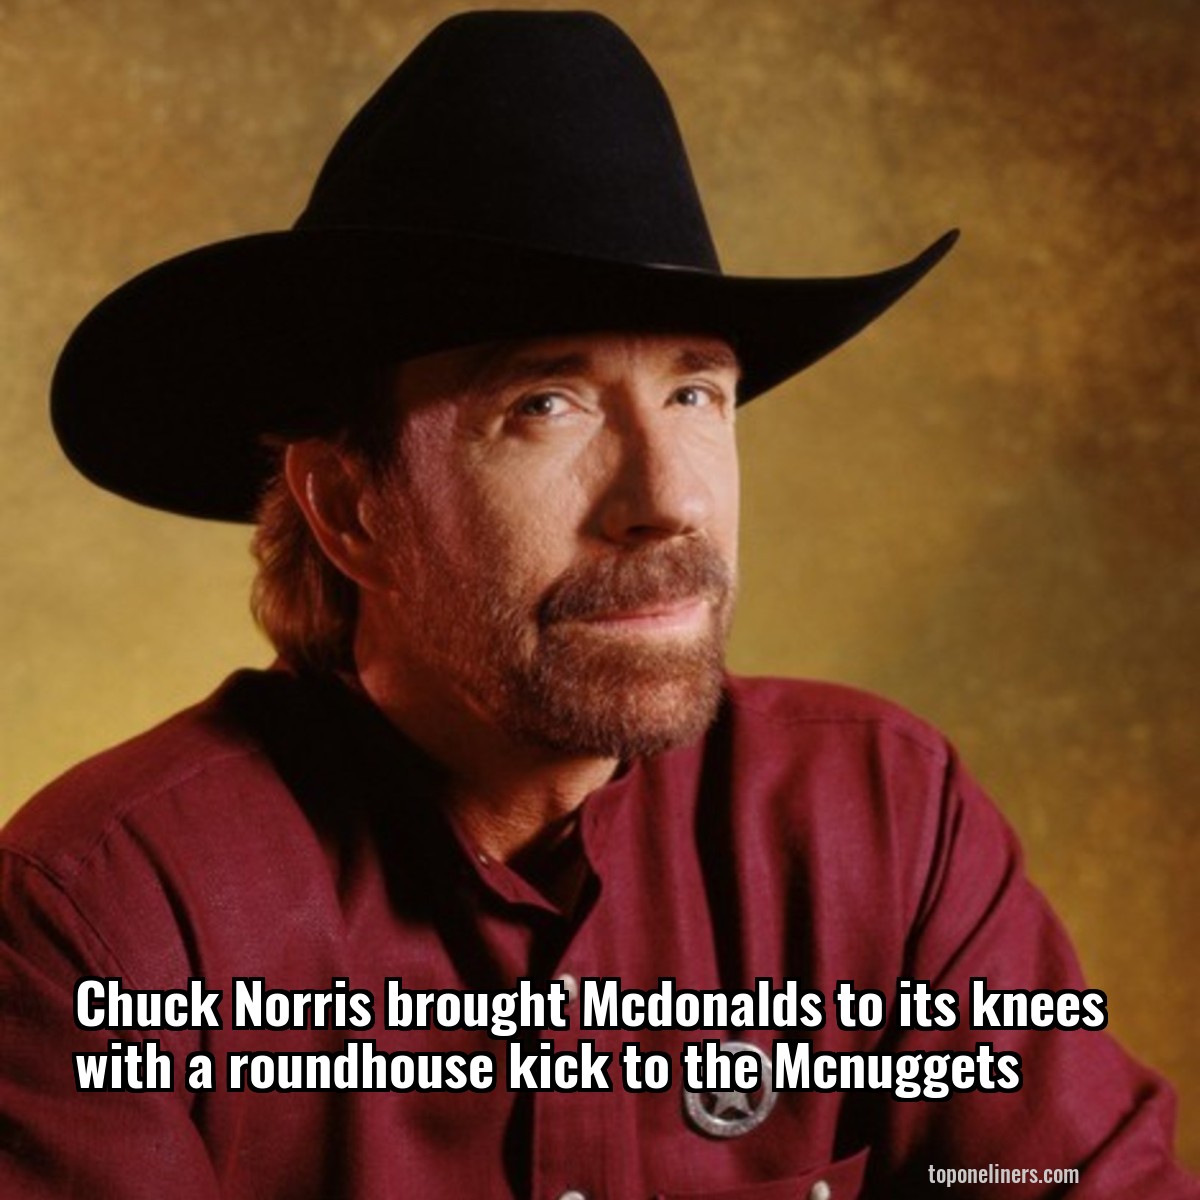 Chuck Norris brought Mcdonalds to its knees with a roundhouse kick to the Mcnuggets